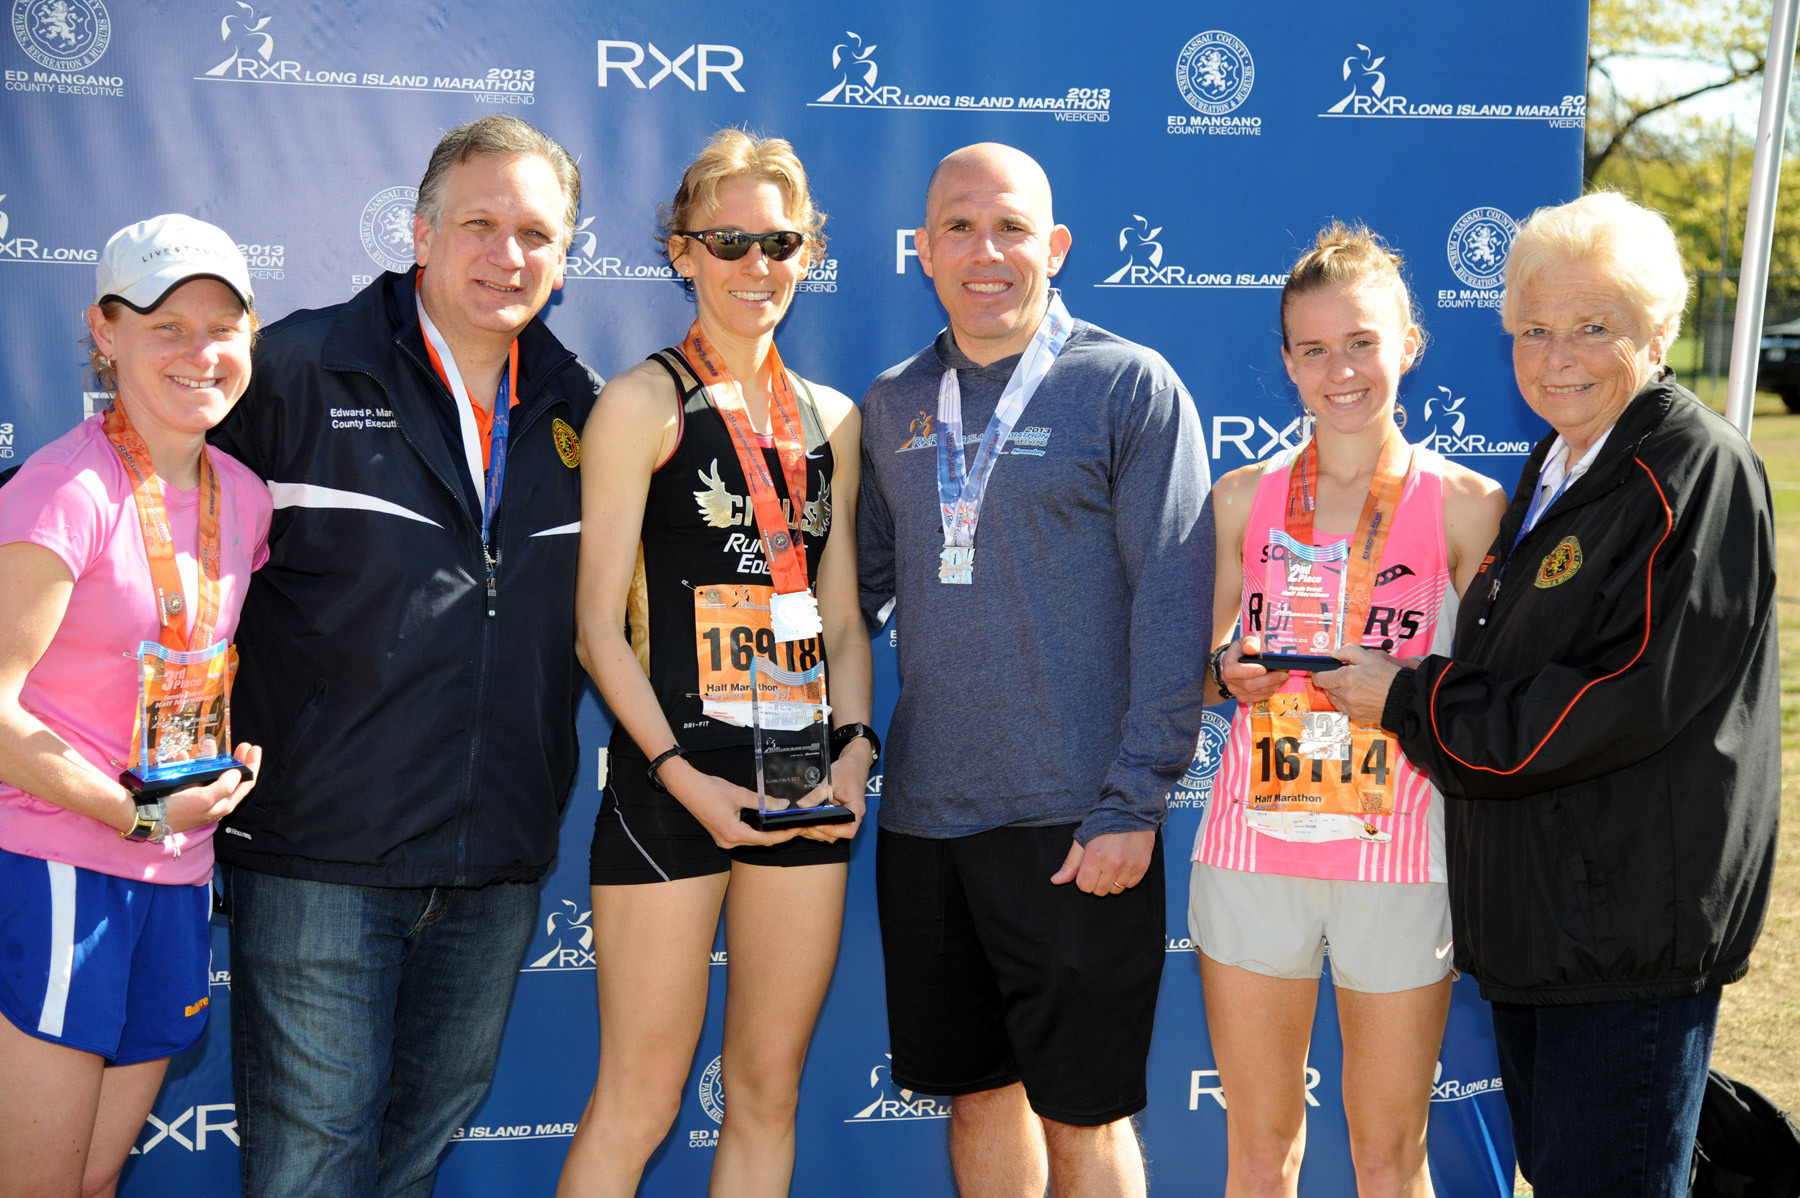 County Executive Ed Mangano, second from left, and Scott Rechler, CEO of RXR realty, the race’s title sponsor, with the women’s top three half marathon finishers, first-place Jodie Robertson, third from left, second-place Stefanie Braun, second from right, and third-place Lindsey Block, far left. Also pictured is County Legislator Rose Walker.